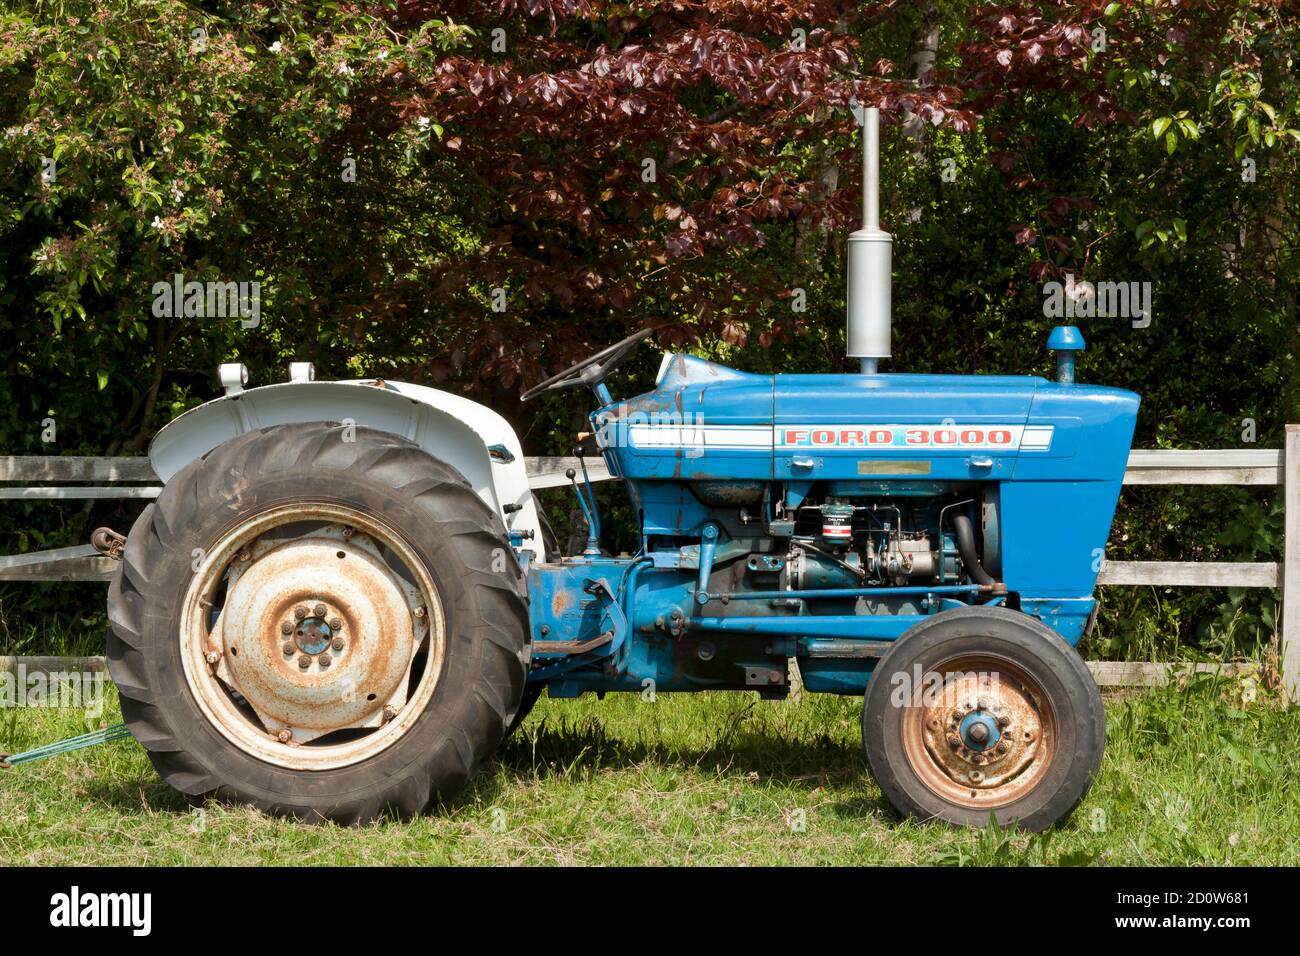 Restored Ford Tractor High Resolution Stock Photography And Images Alamy